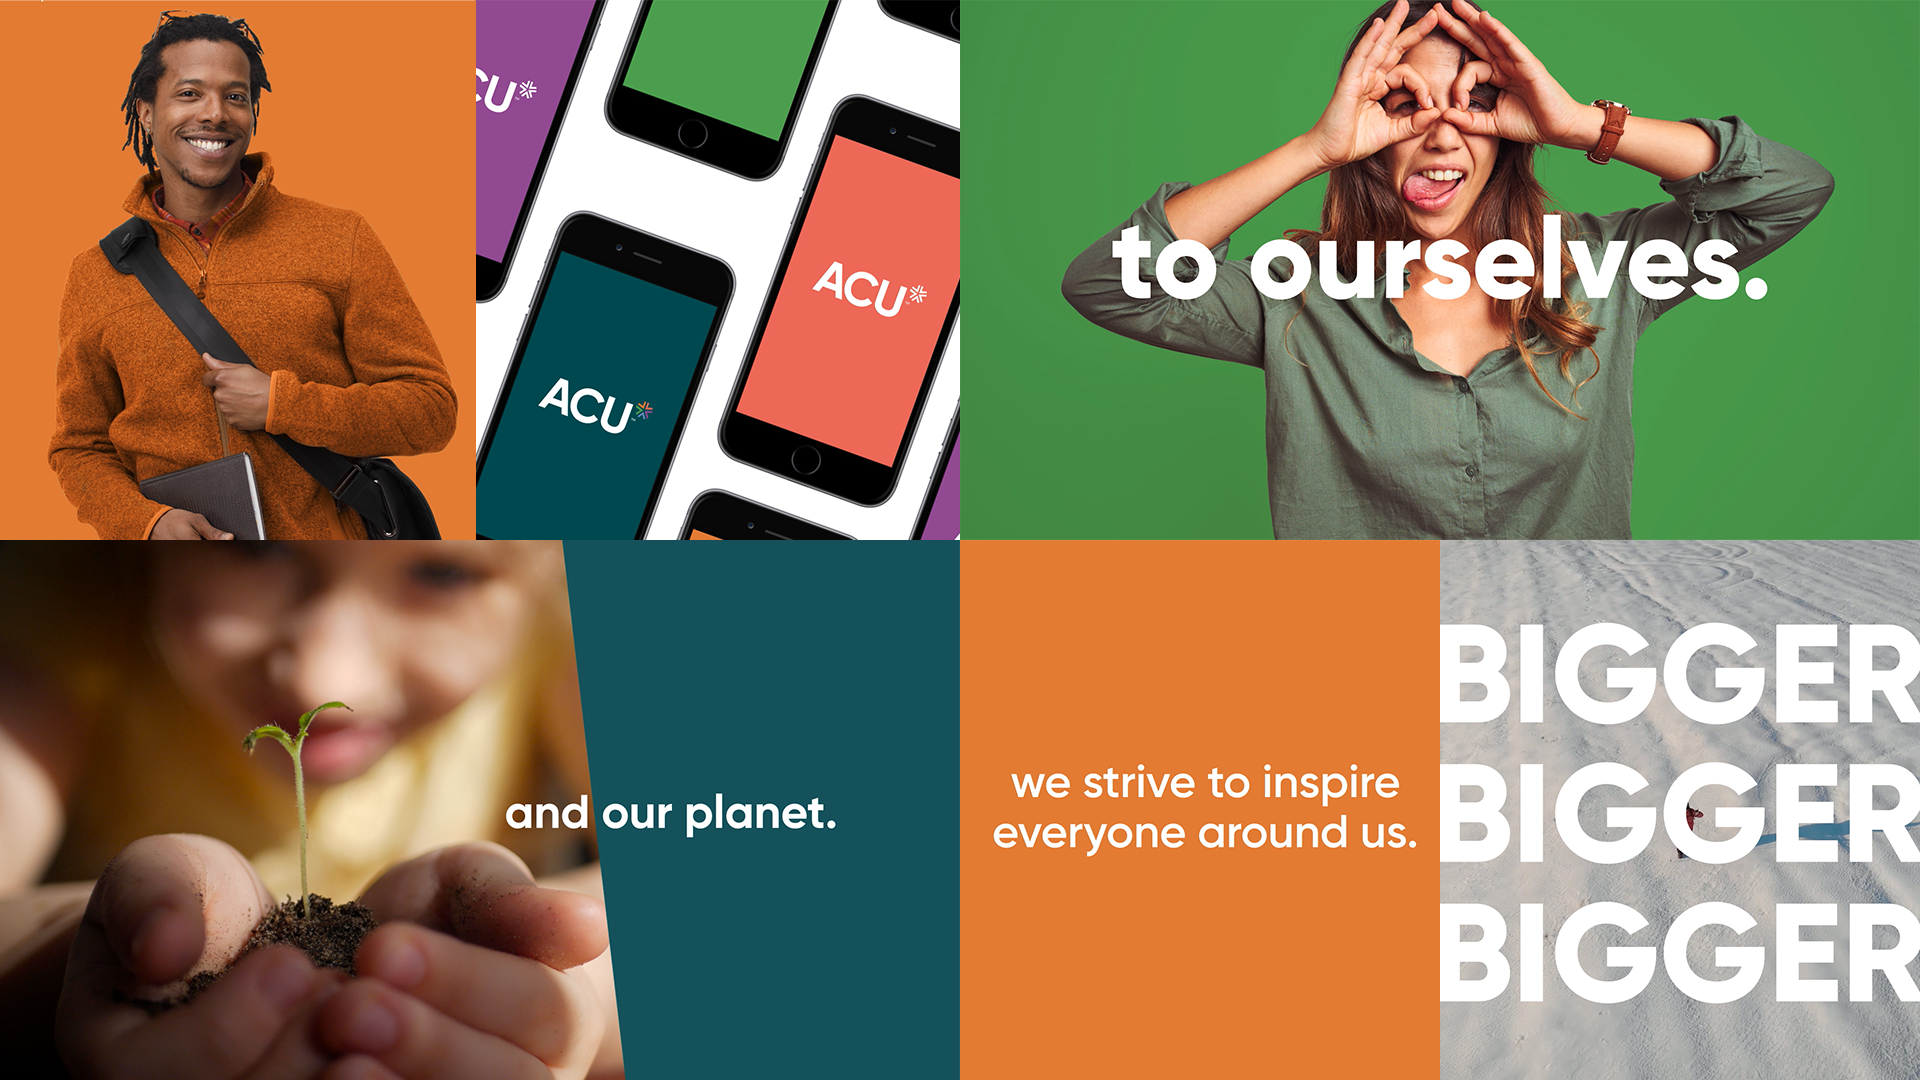 A collage of images, featuring style frames of typography, mobile phones with the ACU logo, hands holding a sprout with the words "and our planet," a man holding a book and wearing a messenger bag and a woman making a silly face.